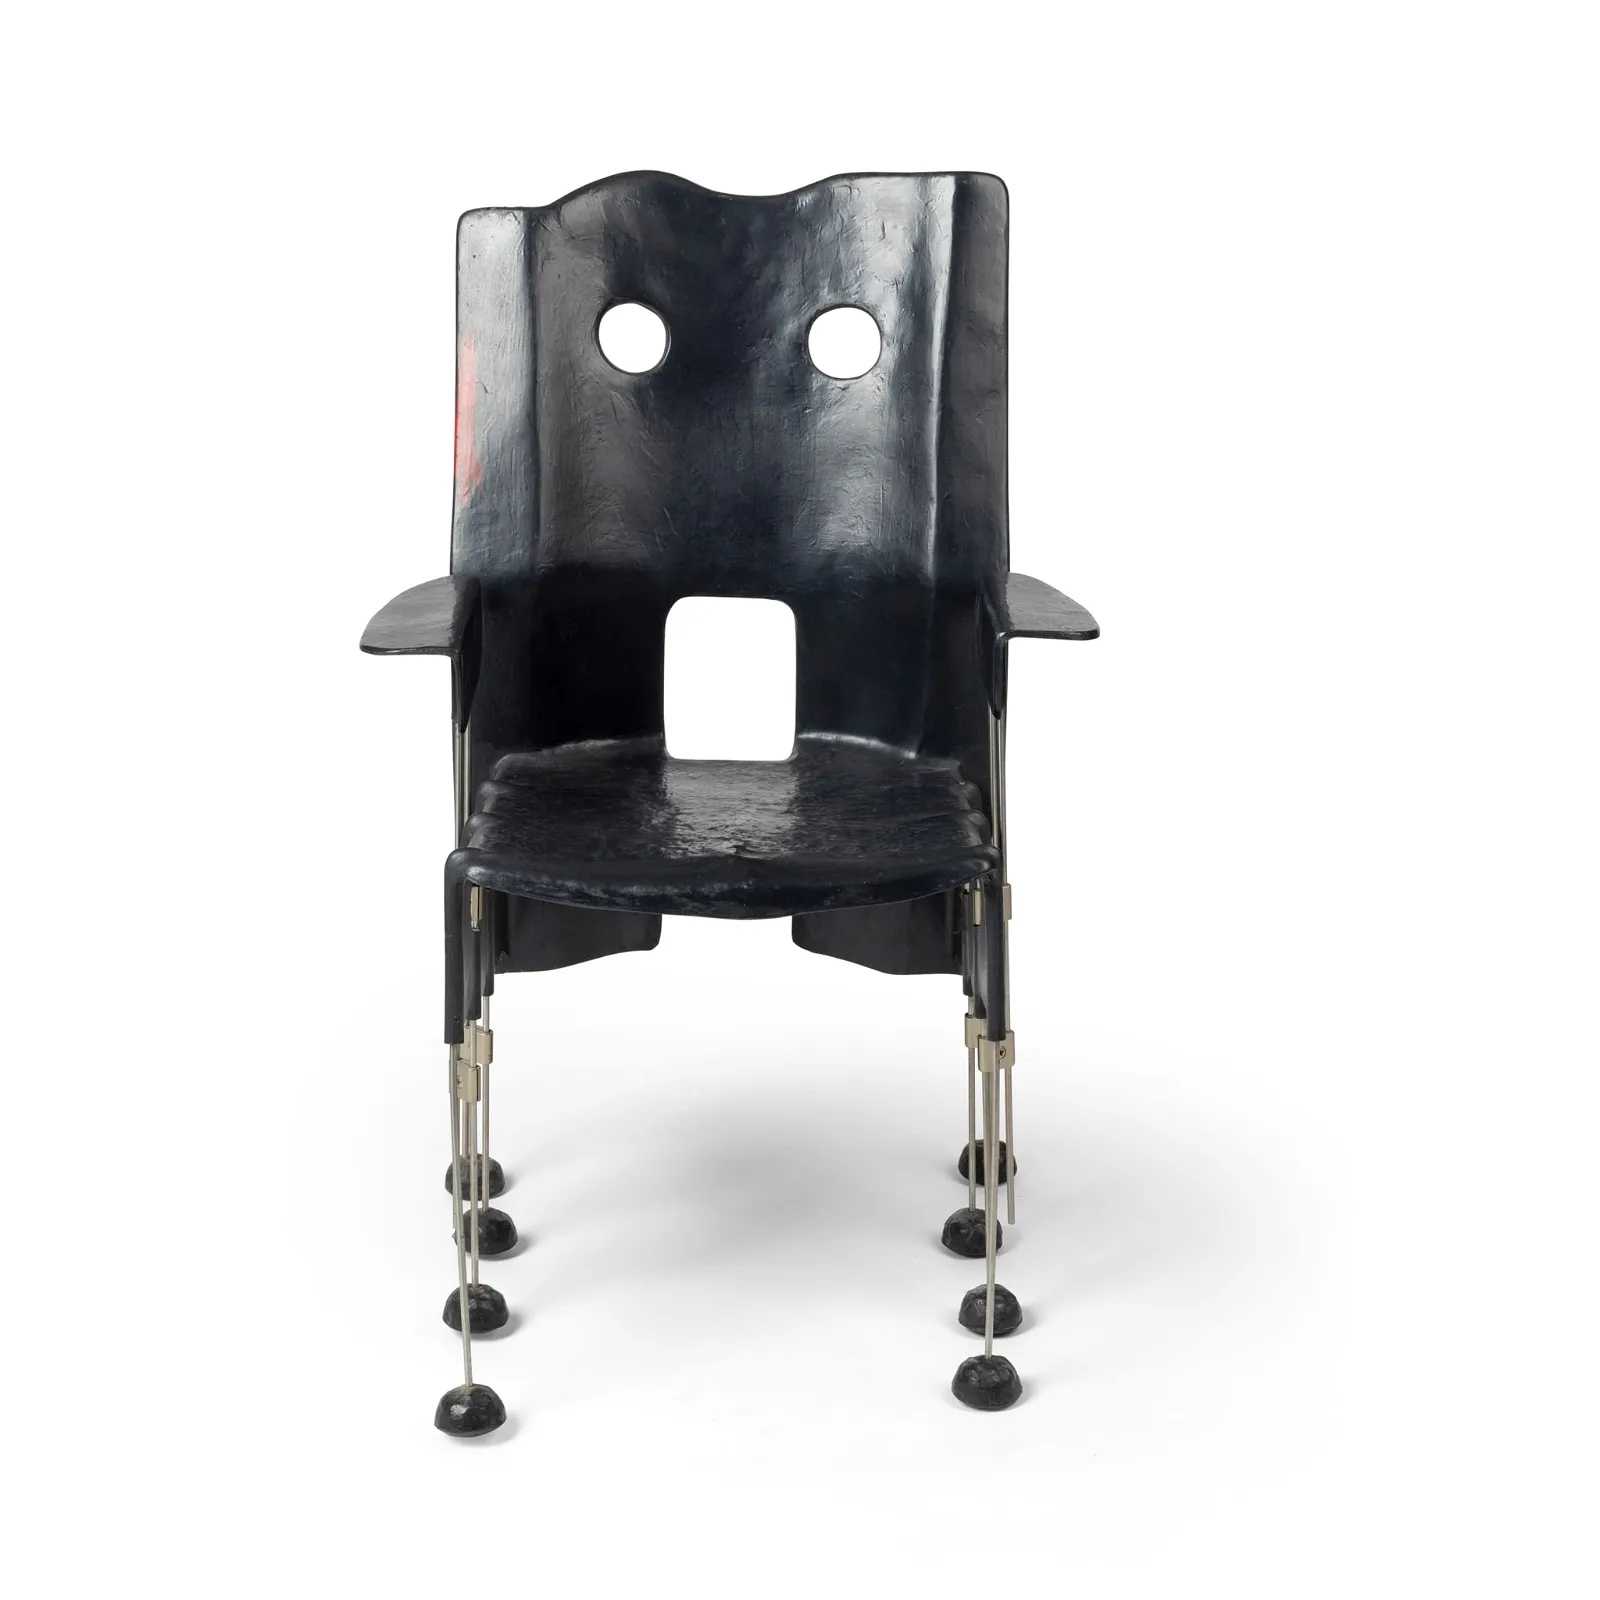 Greene Street Chair designed by Gaetano Pesce for Vita, which sold for £5,500 ($6,905, or $9,040 with buyer’s premium) at Lyon & Turnbull.